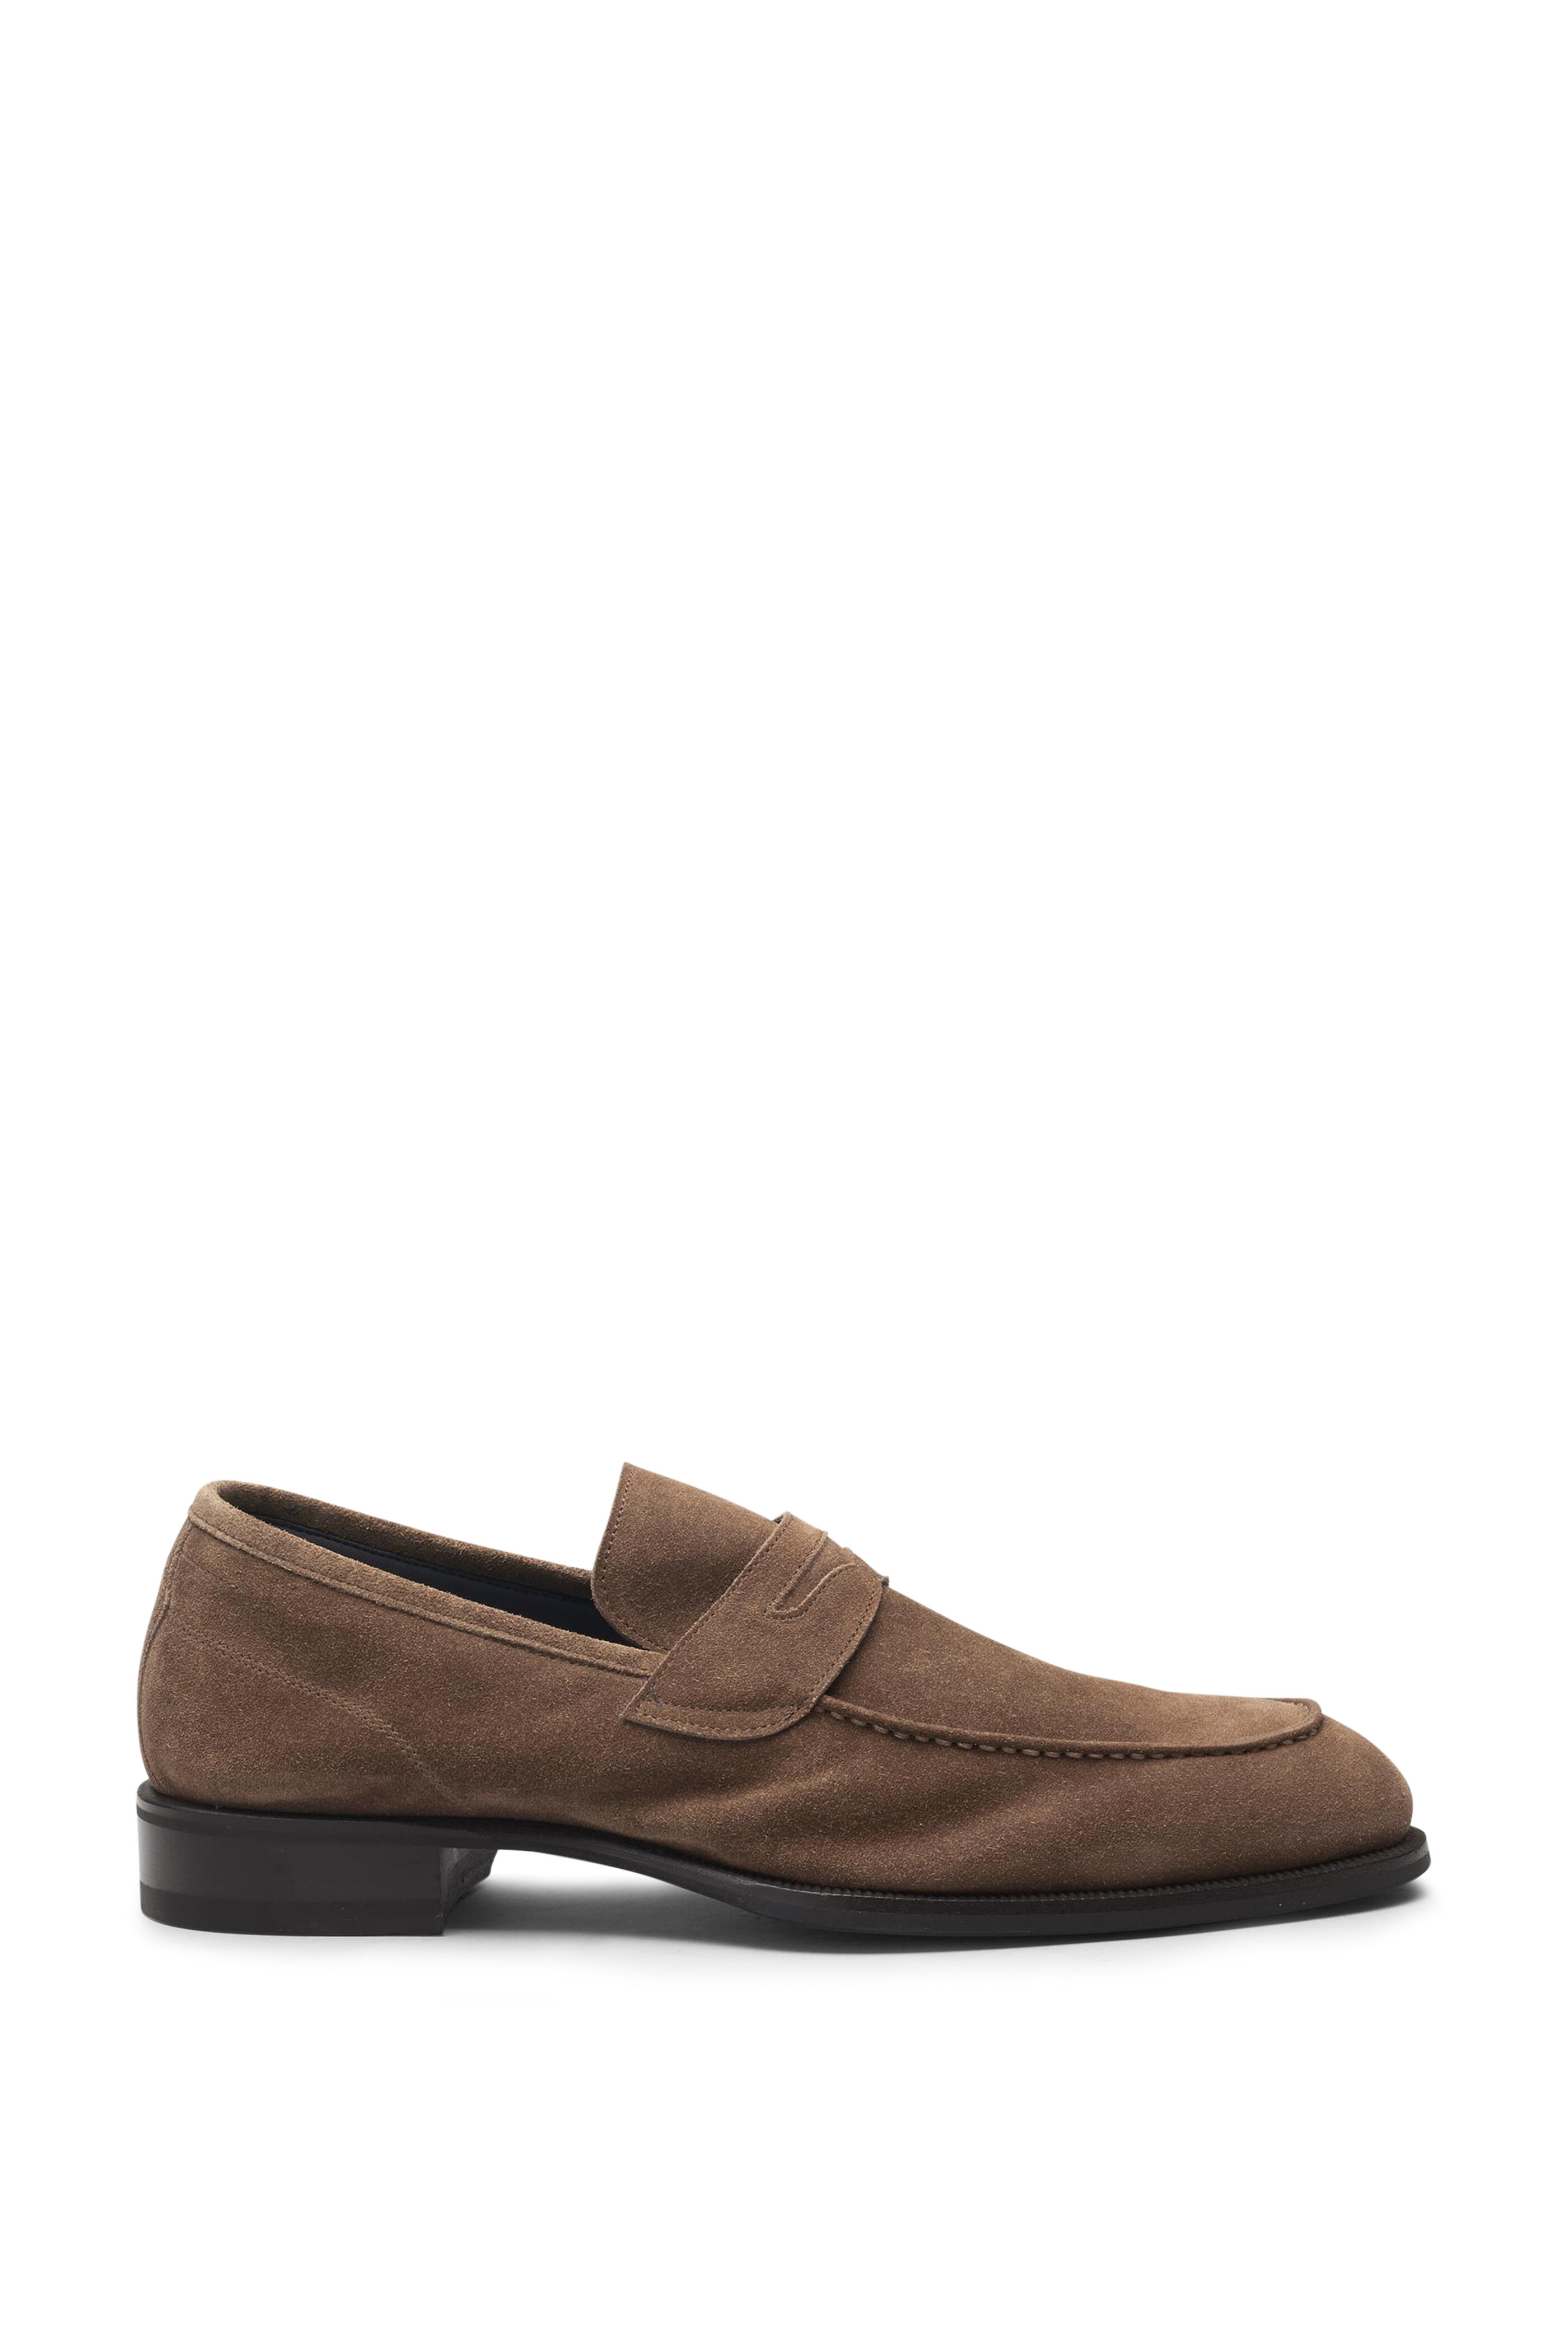 kiwi Rekvisitter Stoop Di Bianco - Brera Farro Suede Penny Loafer | Mitchell Stores